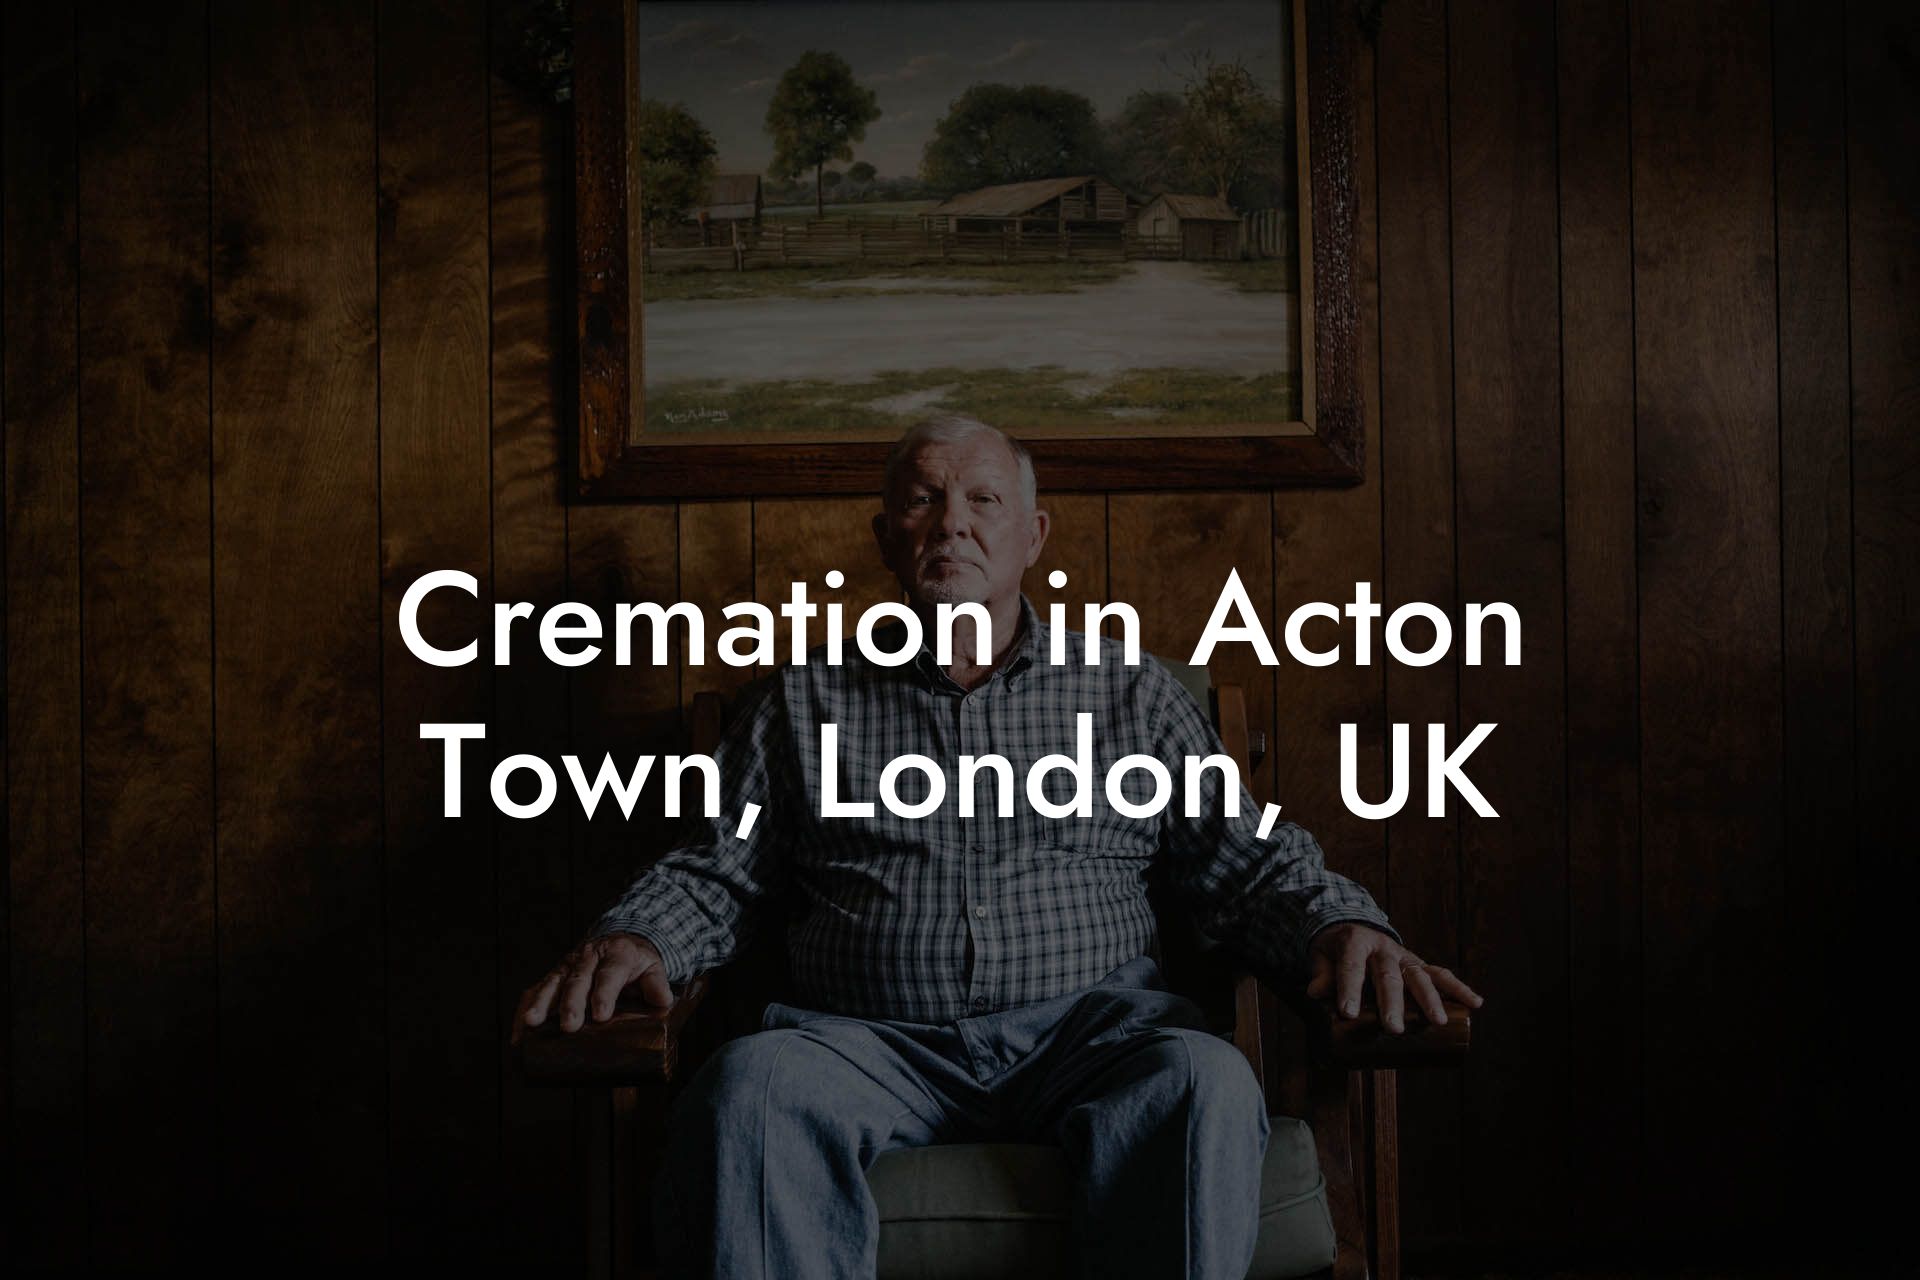 Cremation in Acton Town, London, UK